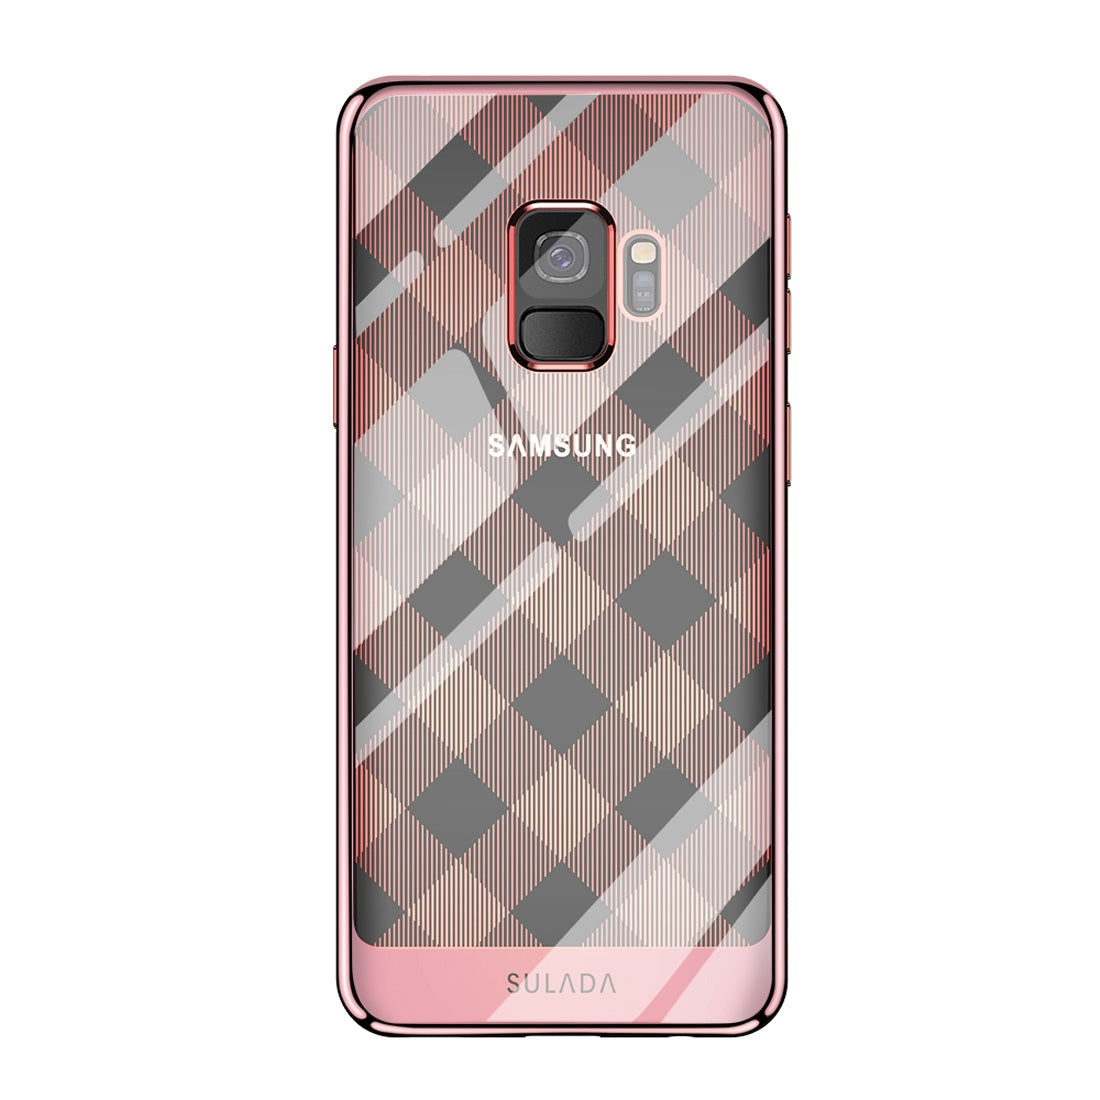 SULADA Plating + Radium Carving TPU Soft Case for Galaxy S9+ (Rose Gold)